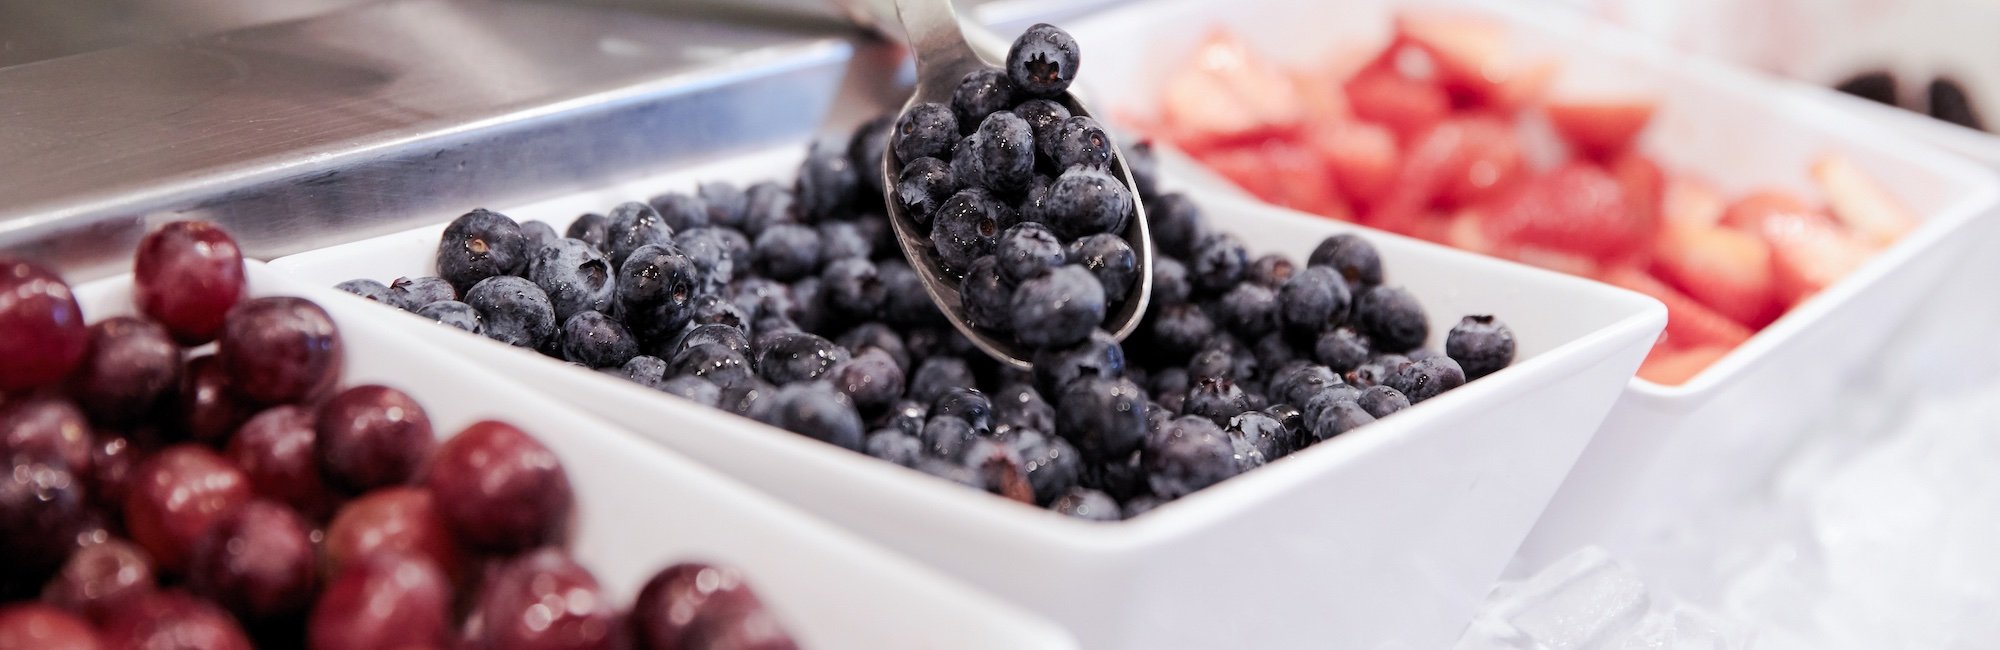 Close up of hand scooping blueberries at a salad bar